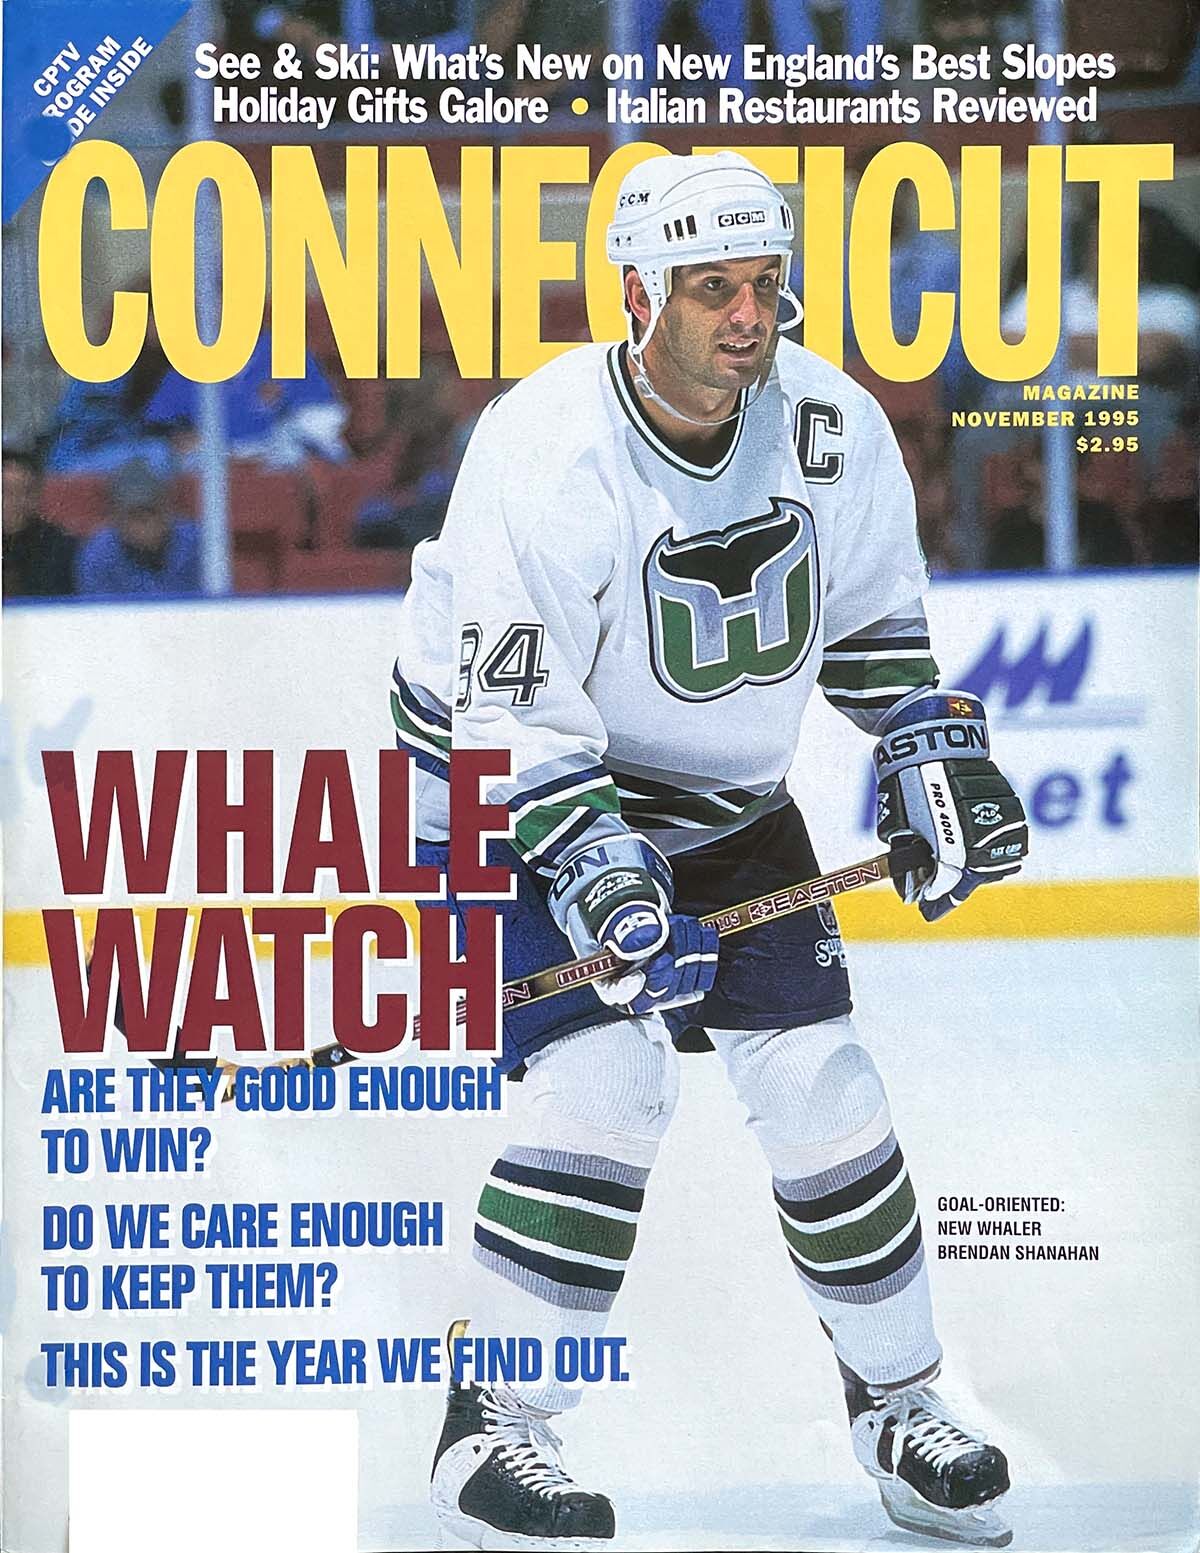 Whalers Here - Did the whalers play in a mall? When